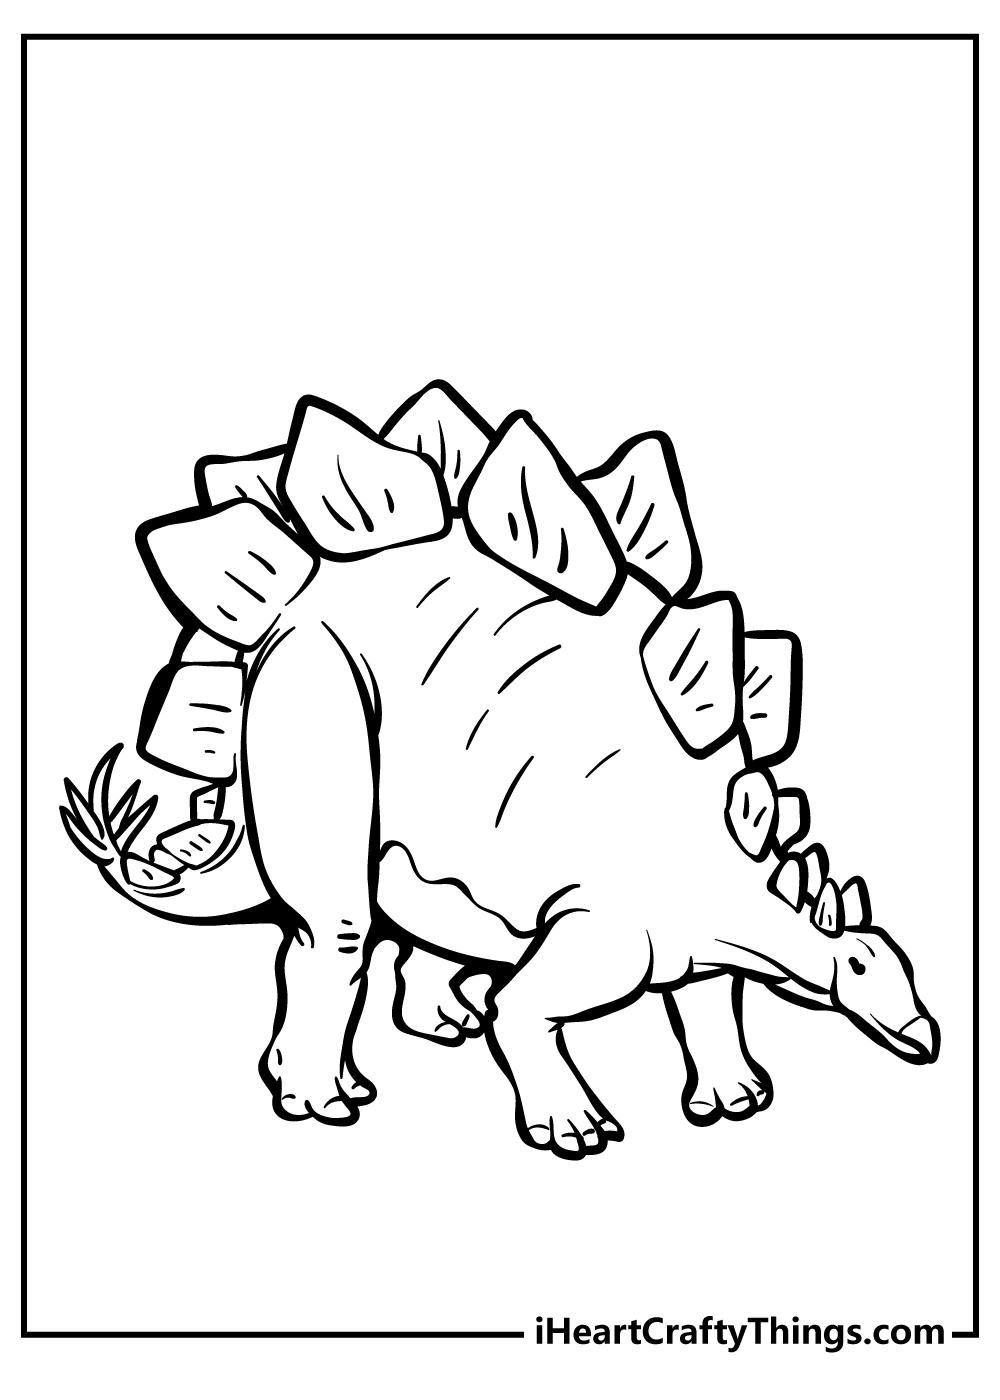 Jurassic World Coloring Pages free pdf download